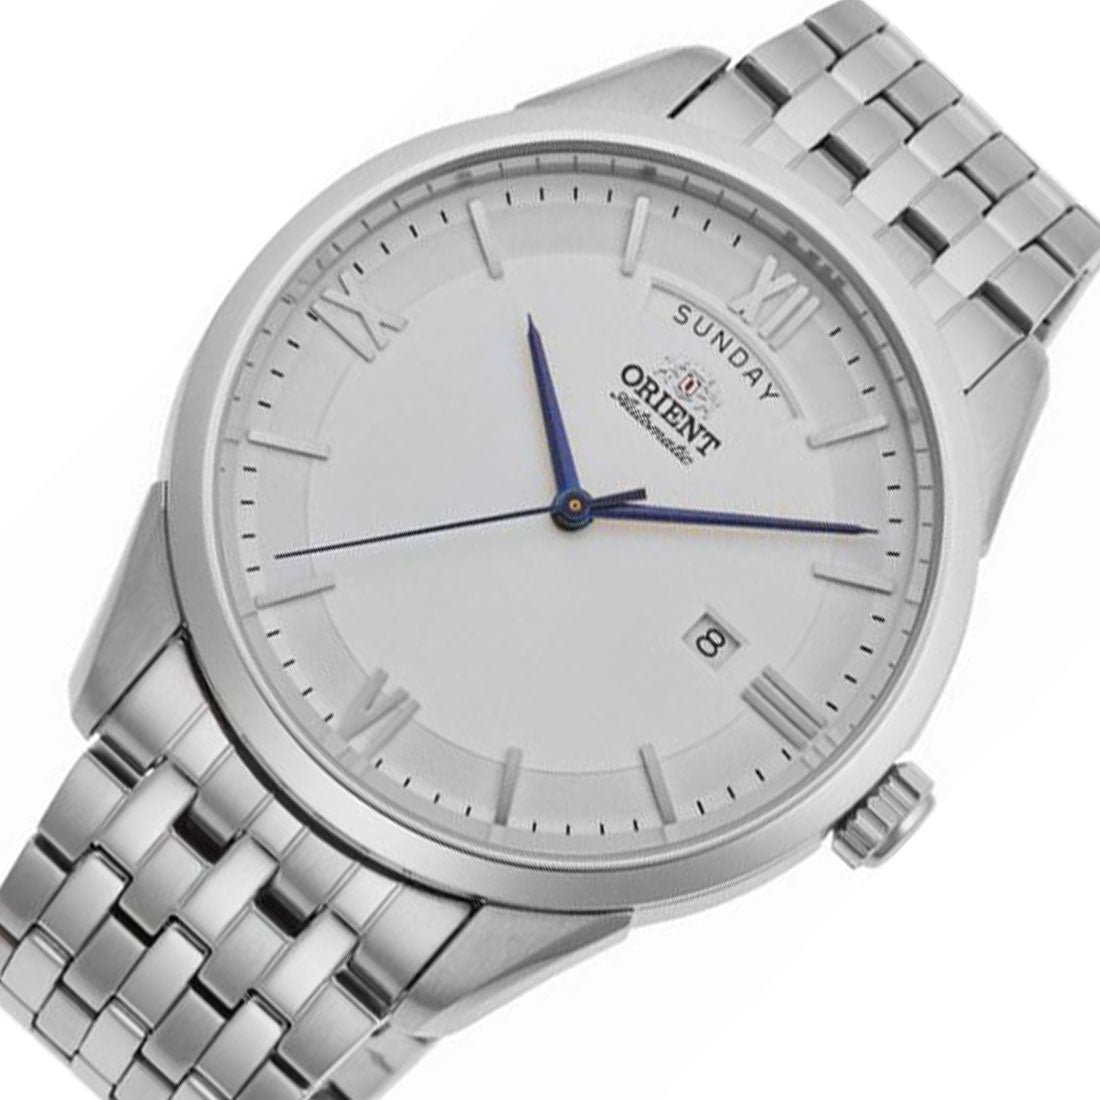 Orient RA-AX0005S RA-AX0005S0HB Automatic White Dial Stainless Steel Watch -Orient